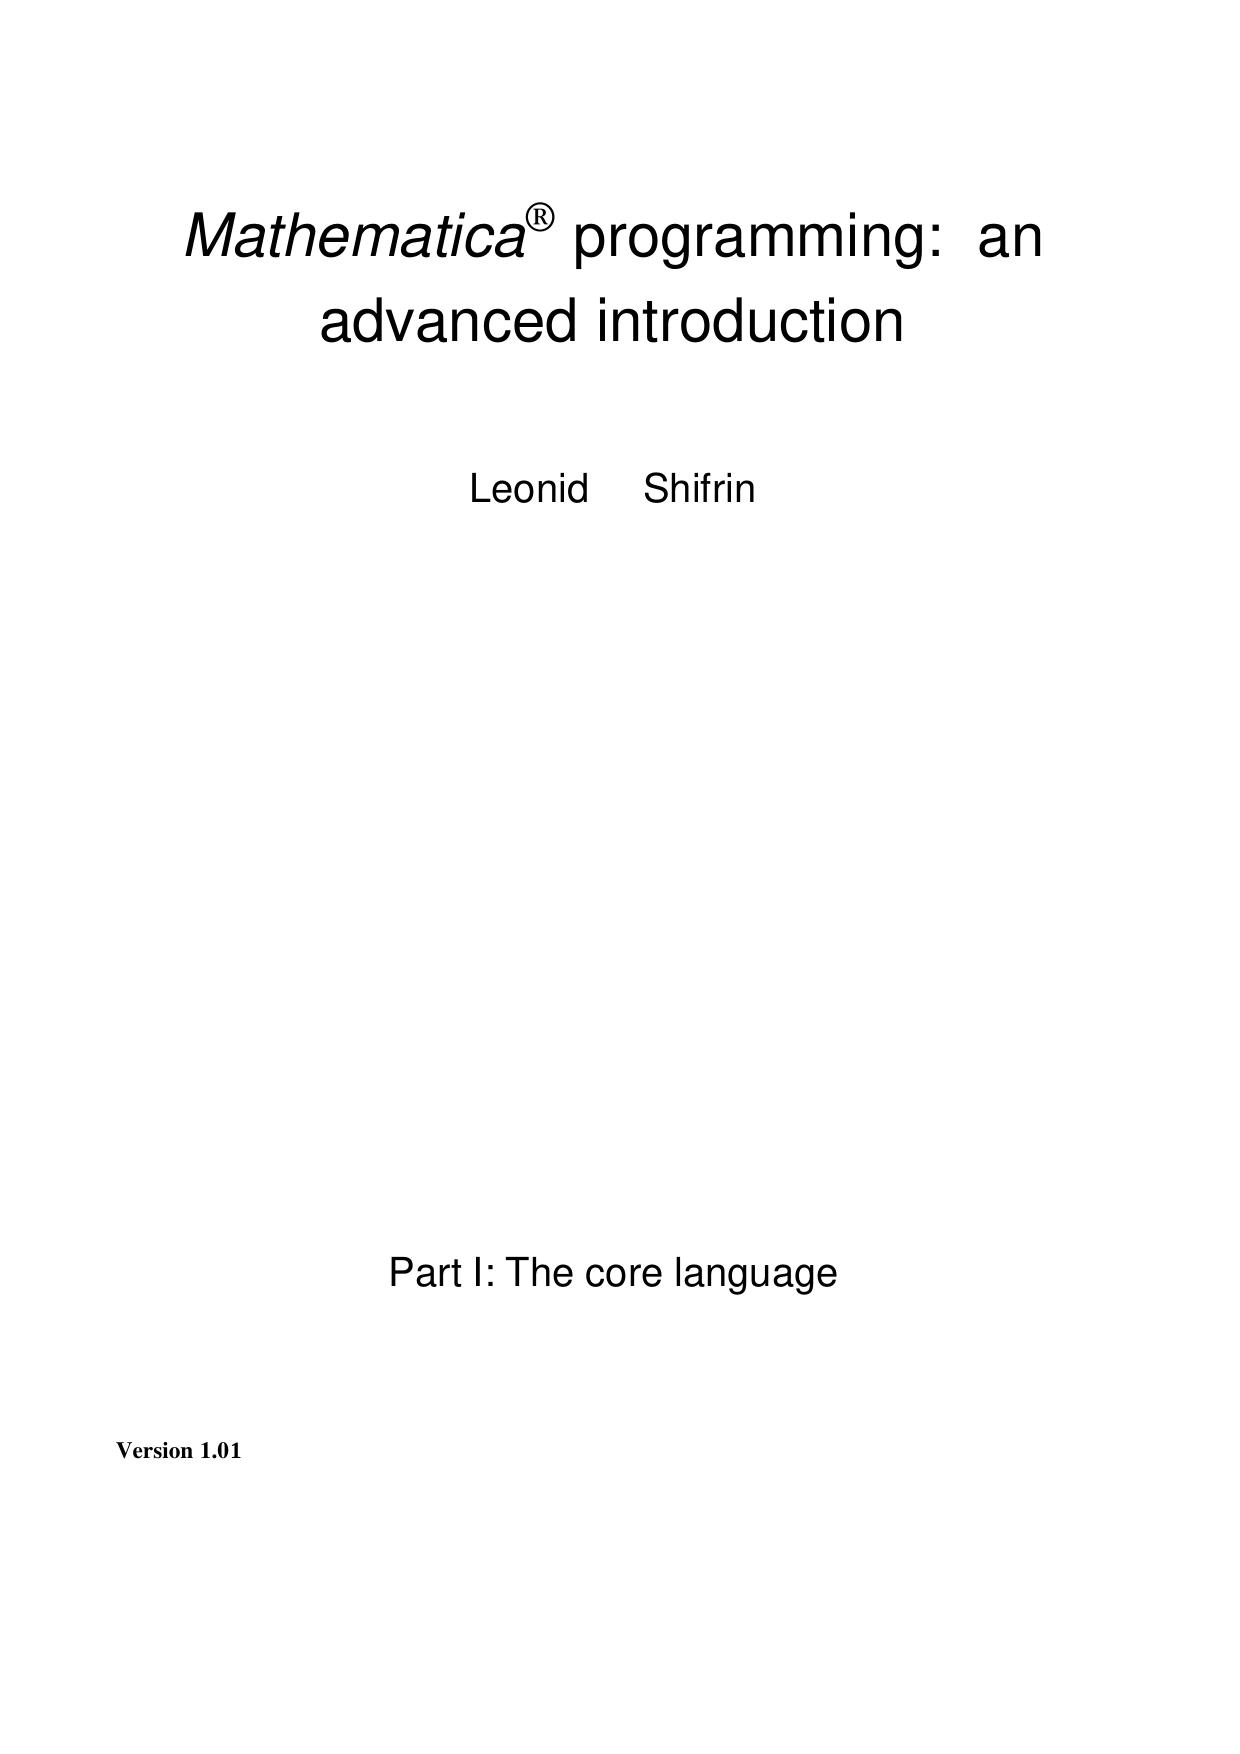 Mathematica® programming an advanced introduction - Part 1: The core language